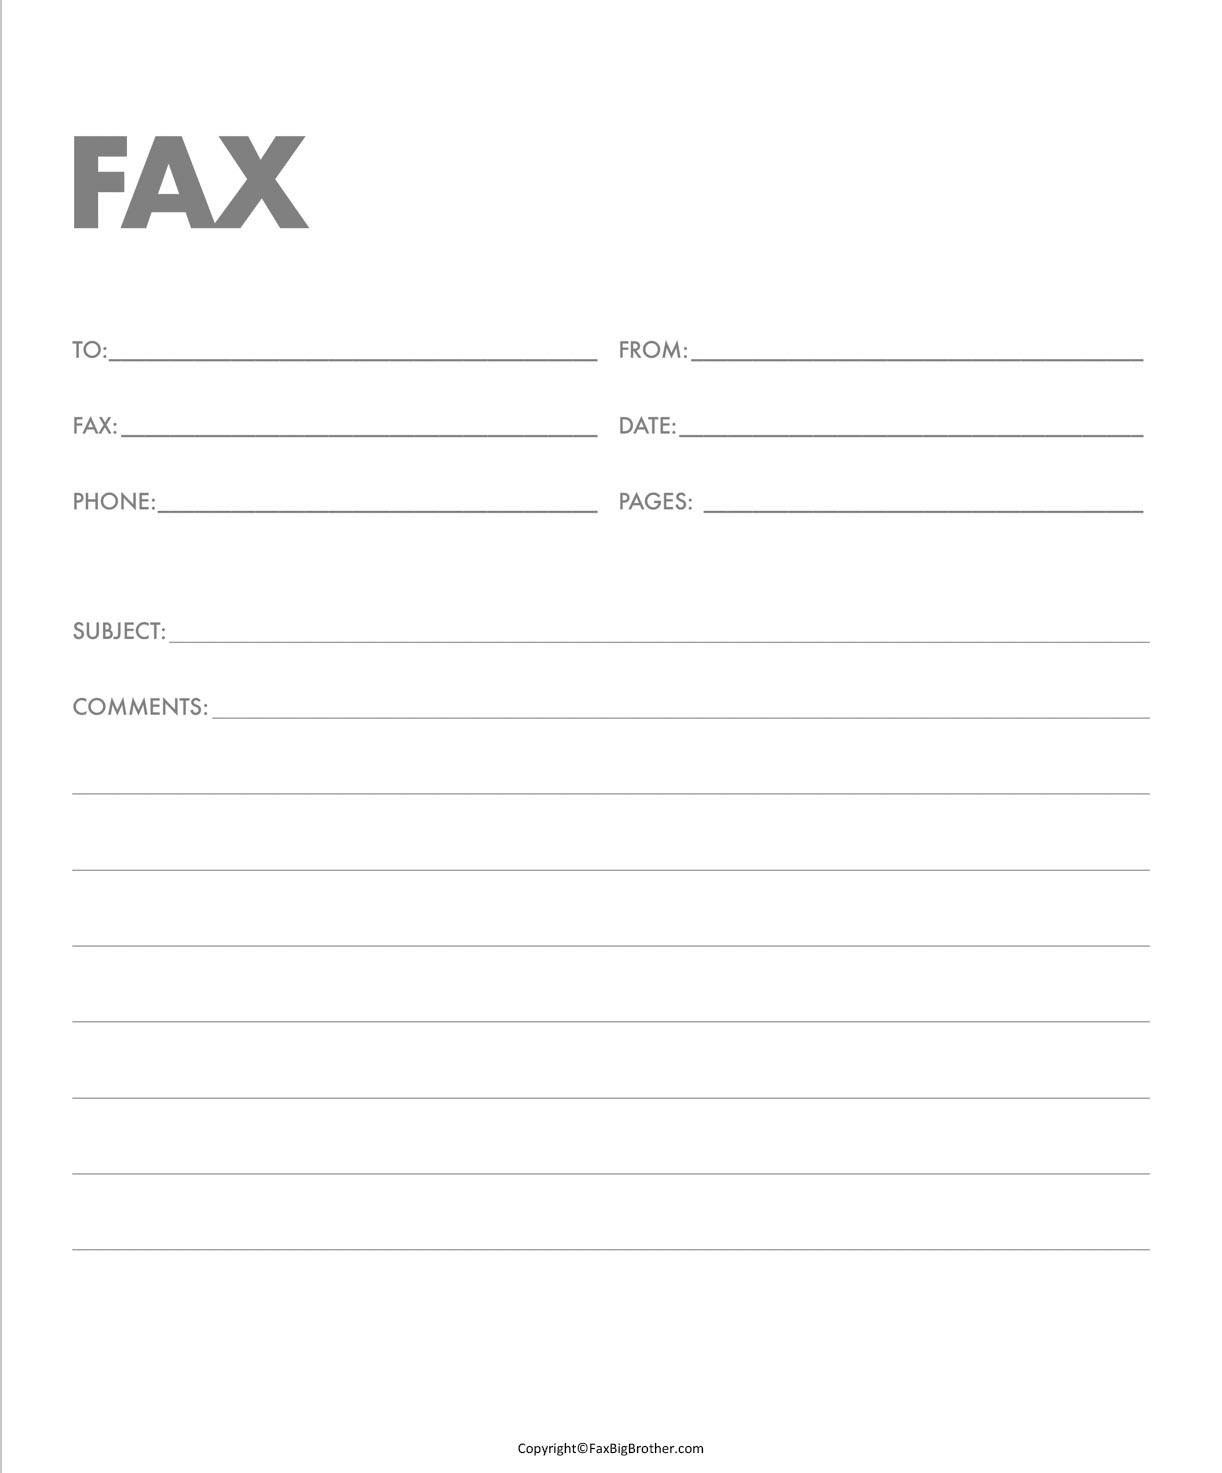 Fax Cover Sheet Example Template